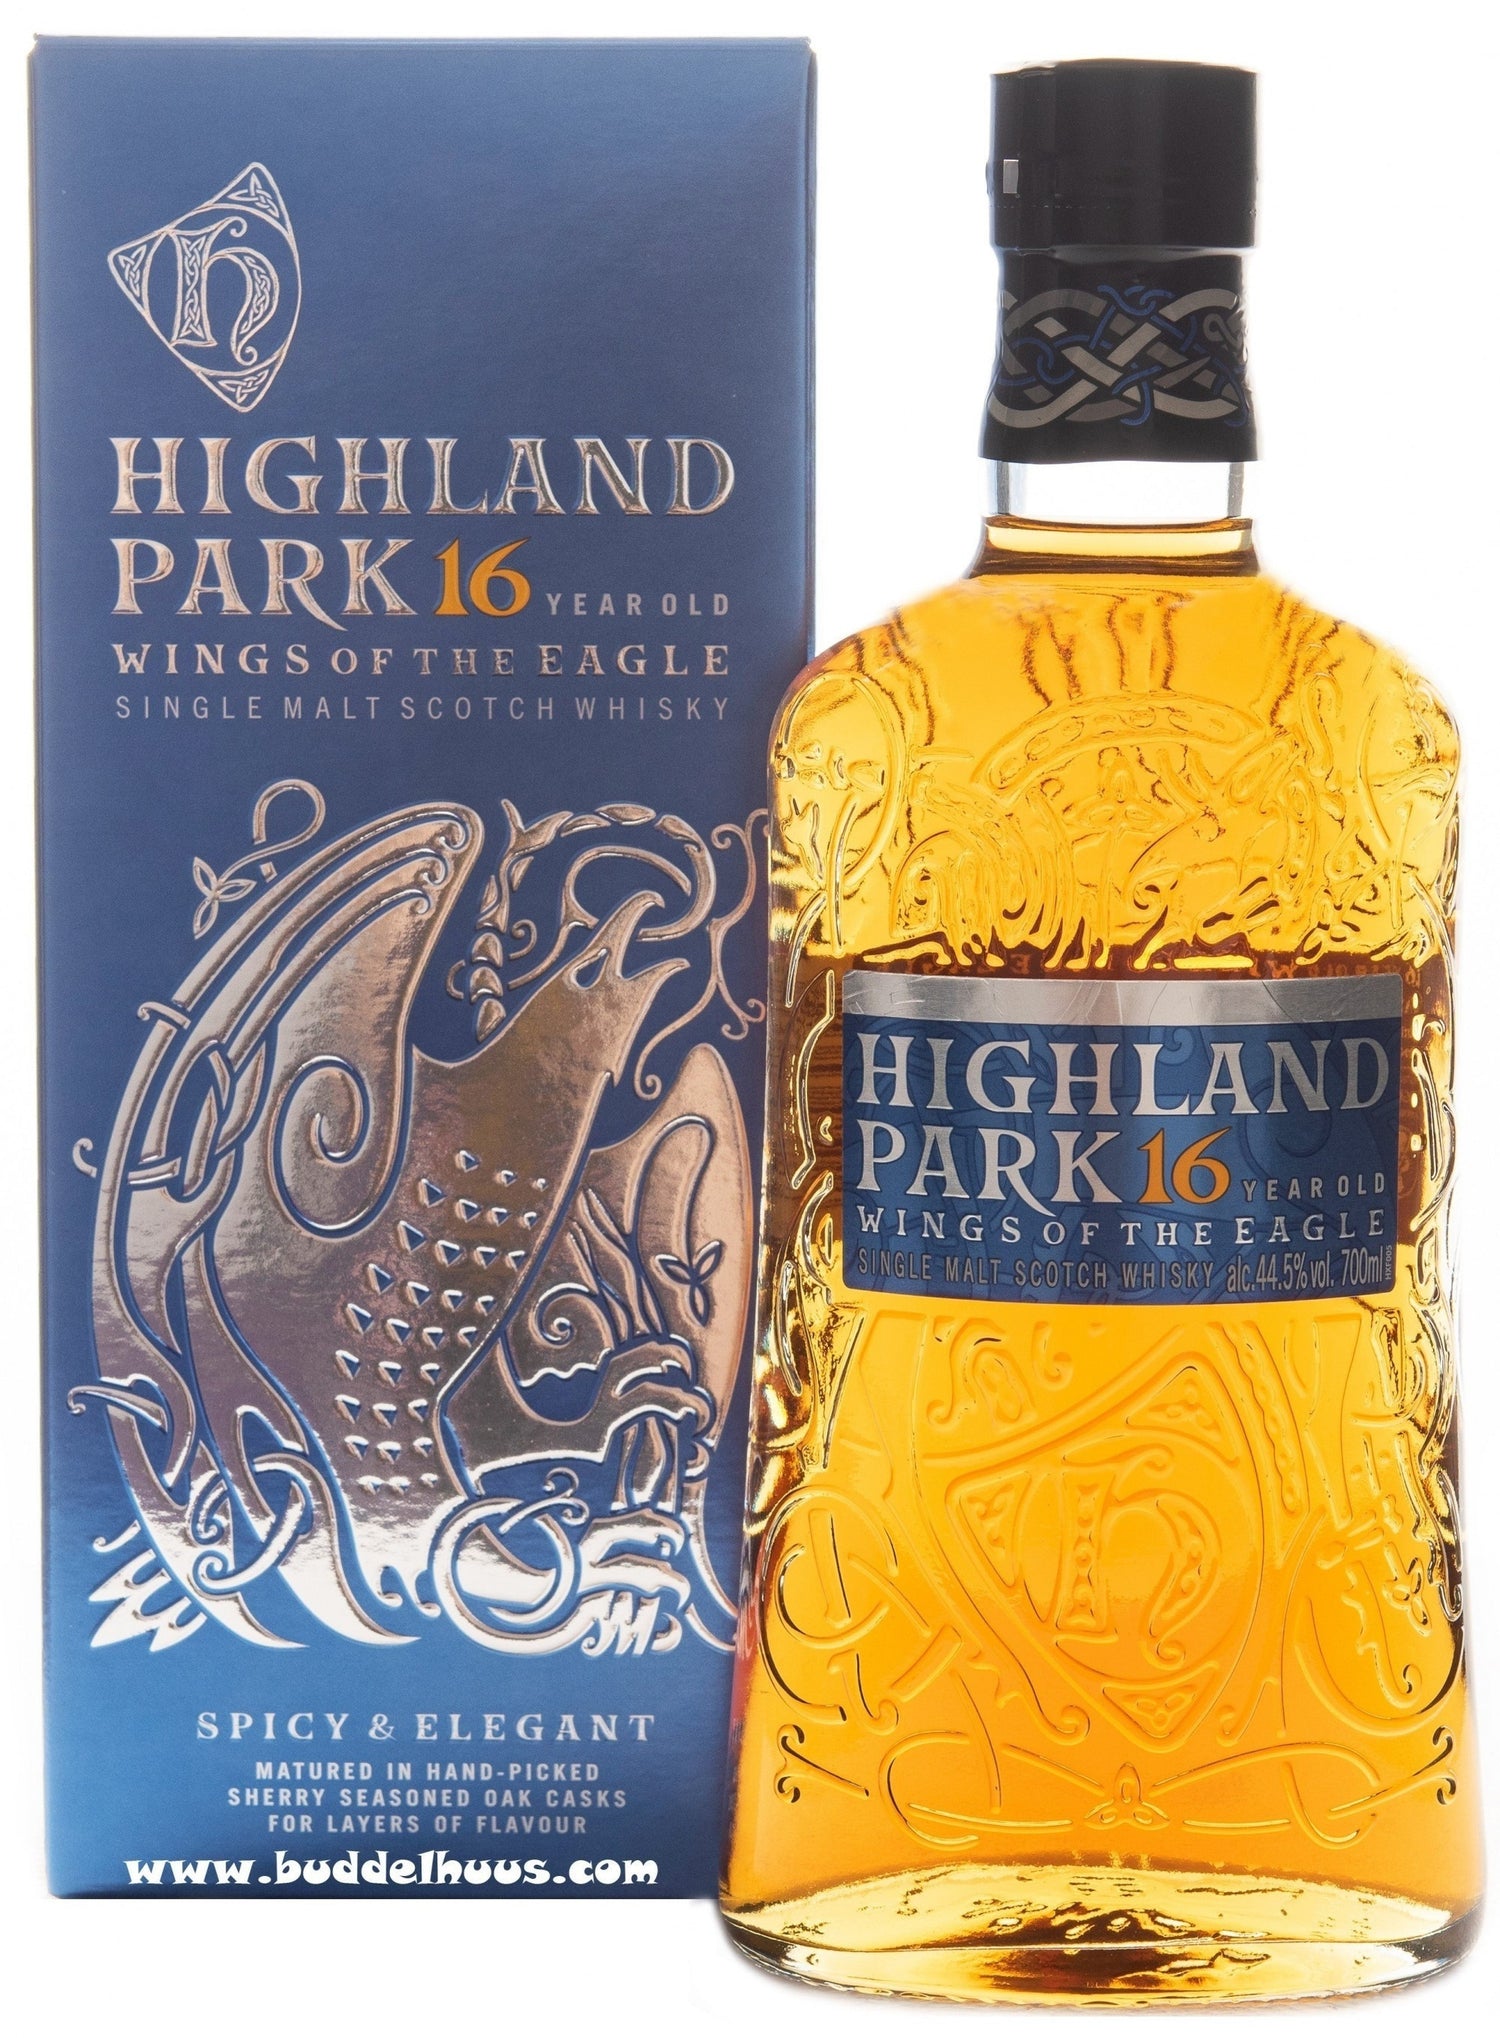 Highland Park 16 yo Wings of the Eagle